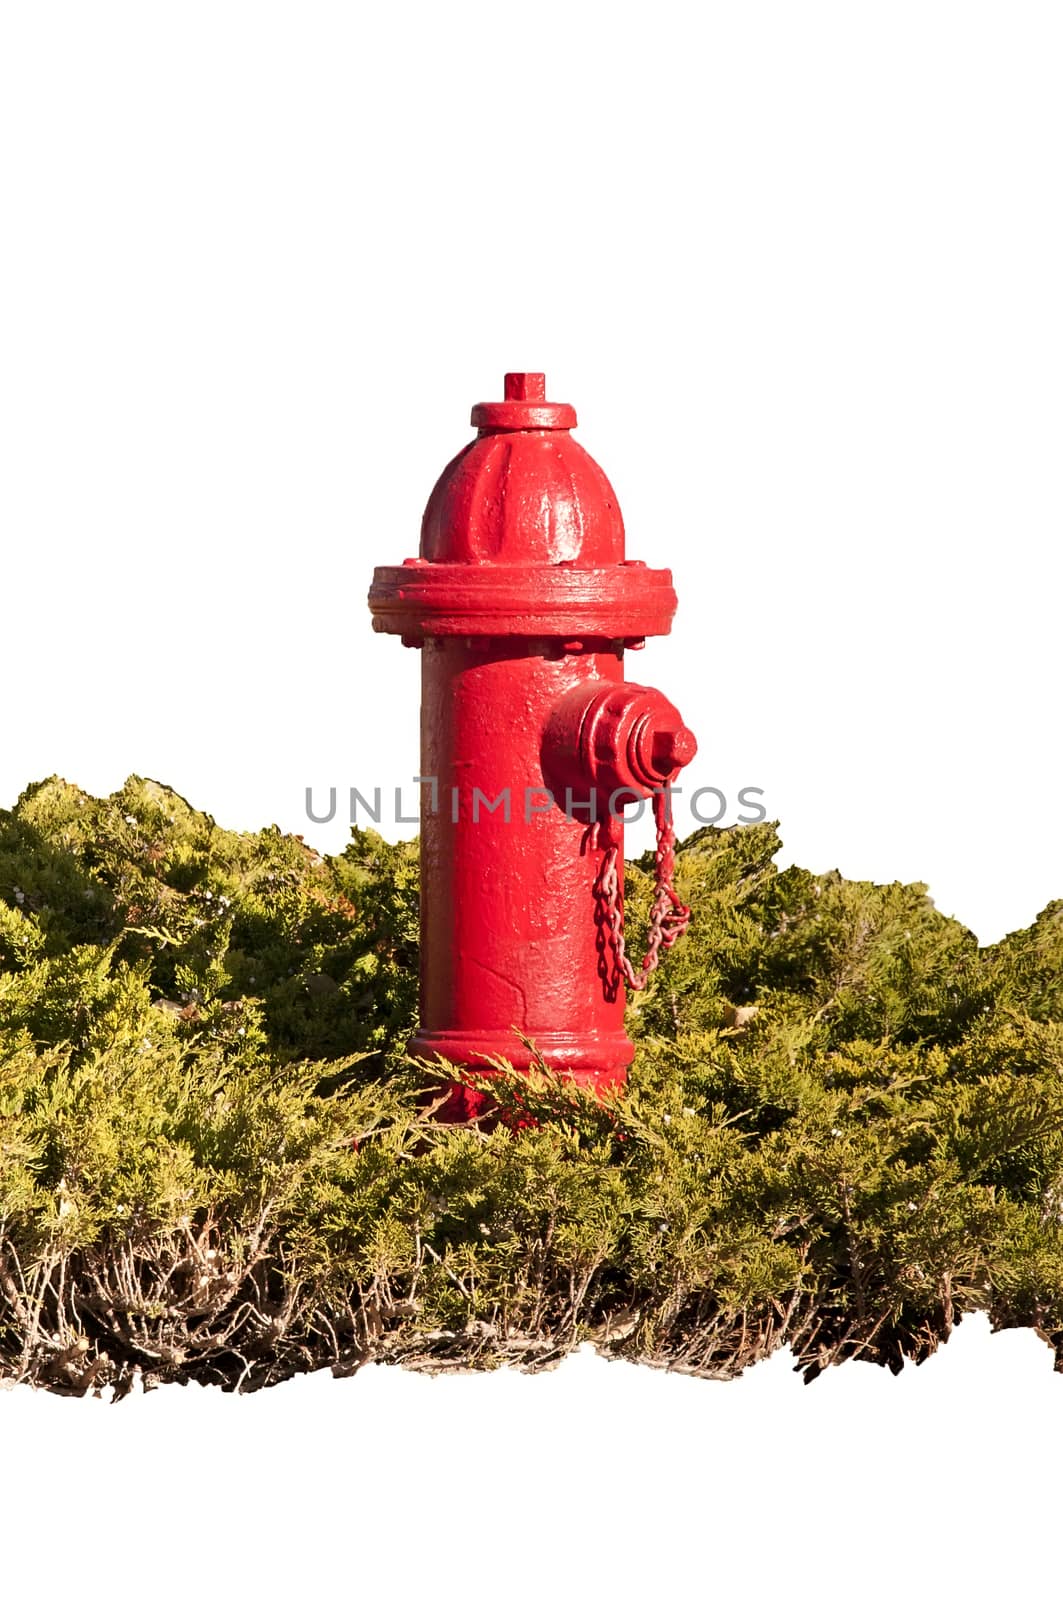 Red fire hydrant in a juniper shrub isolated on a white background with a clipping path